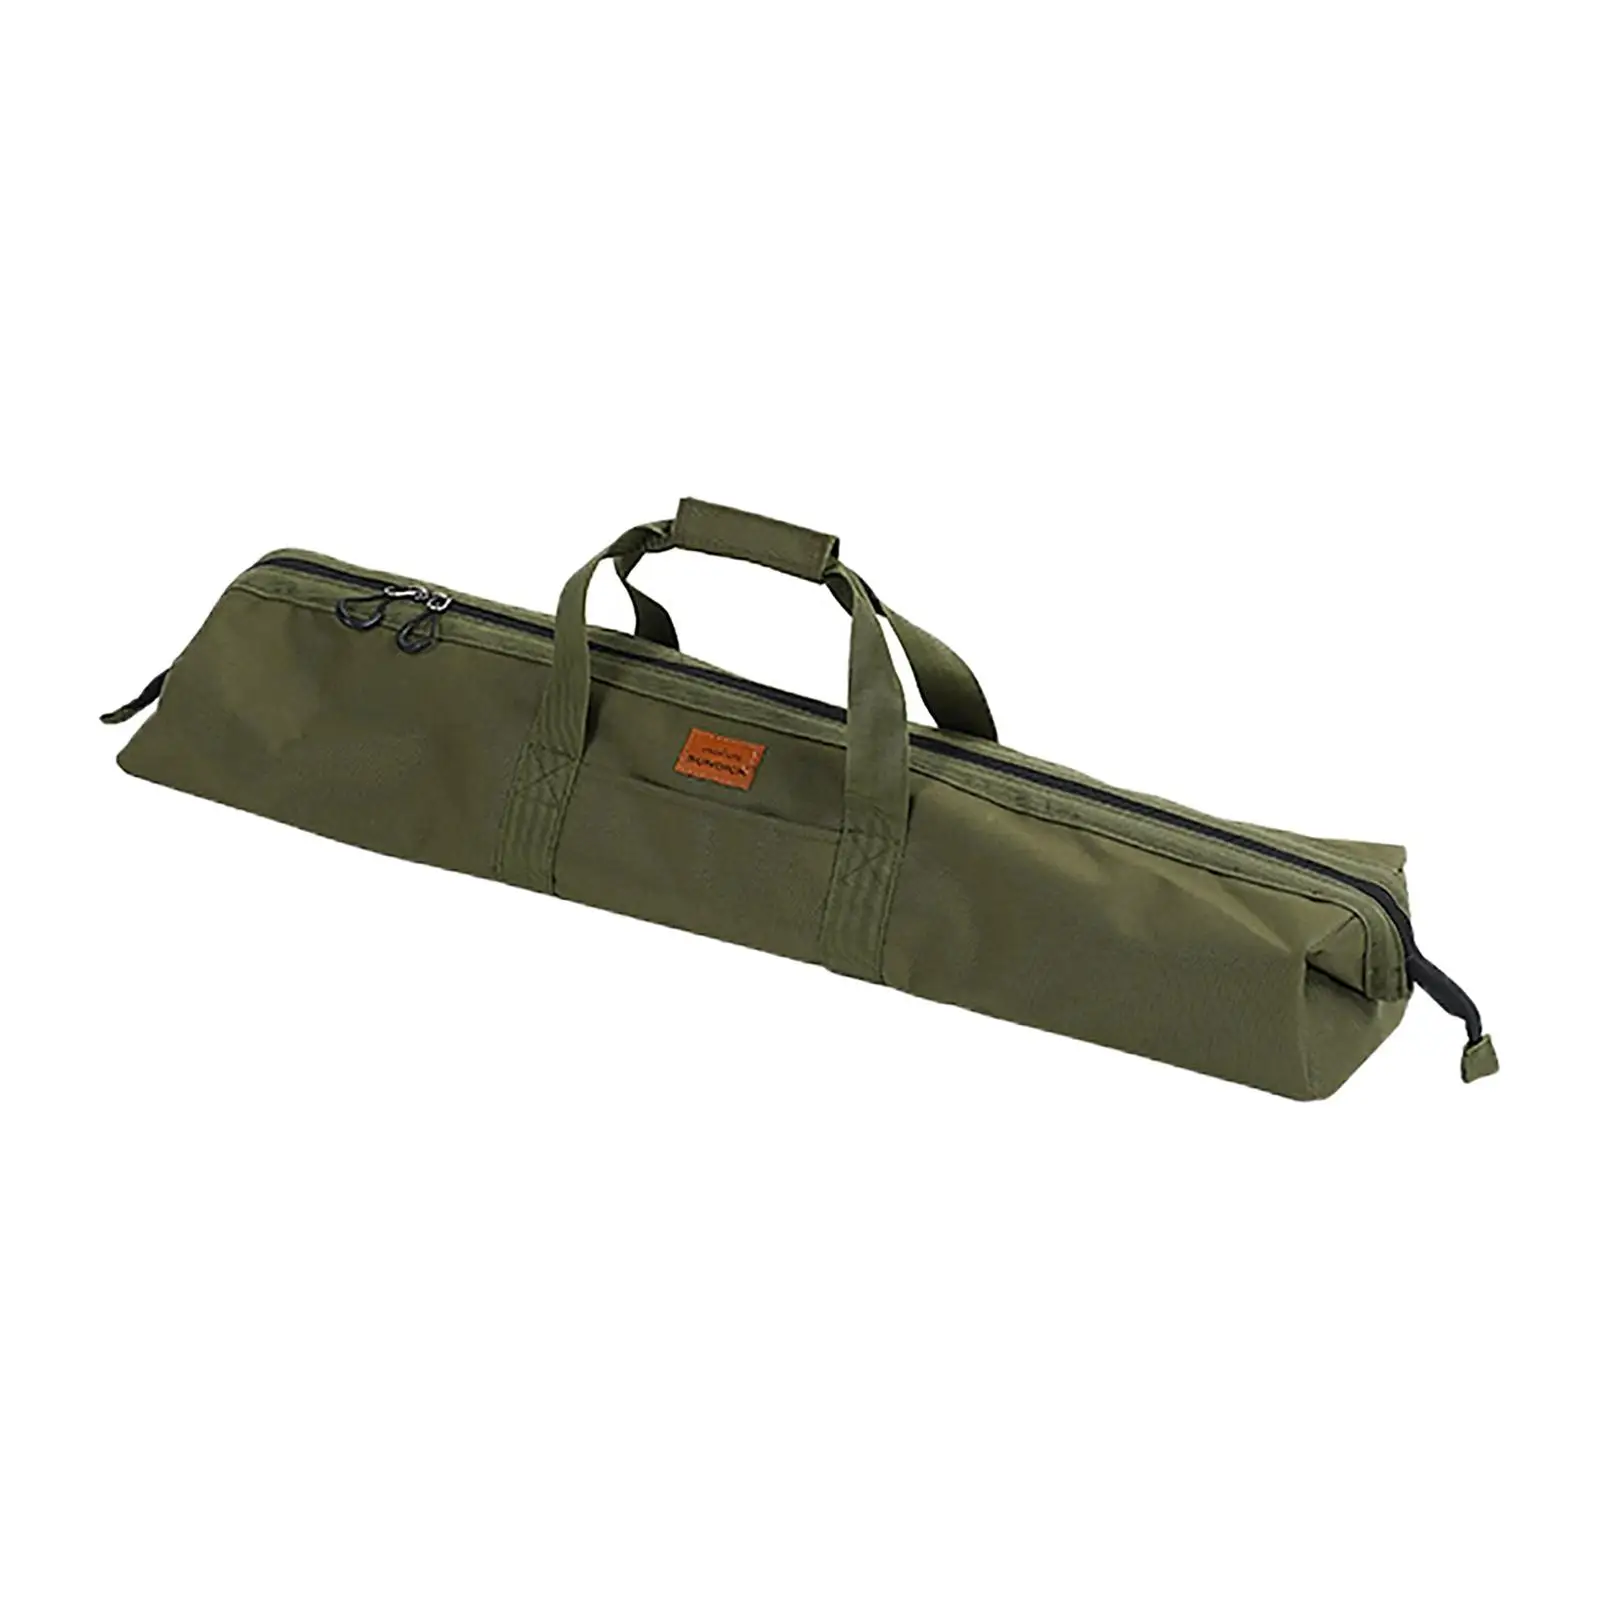 Camping Canopy Pole Storage Bag Handbag Carrying Case for Rod